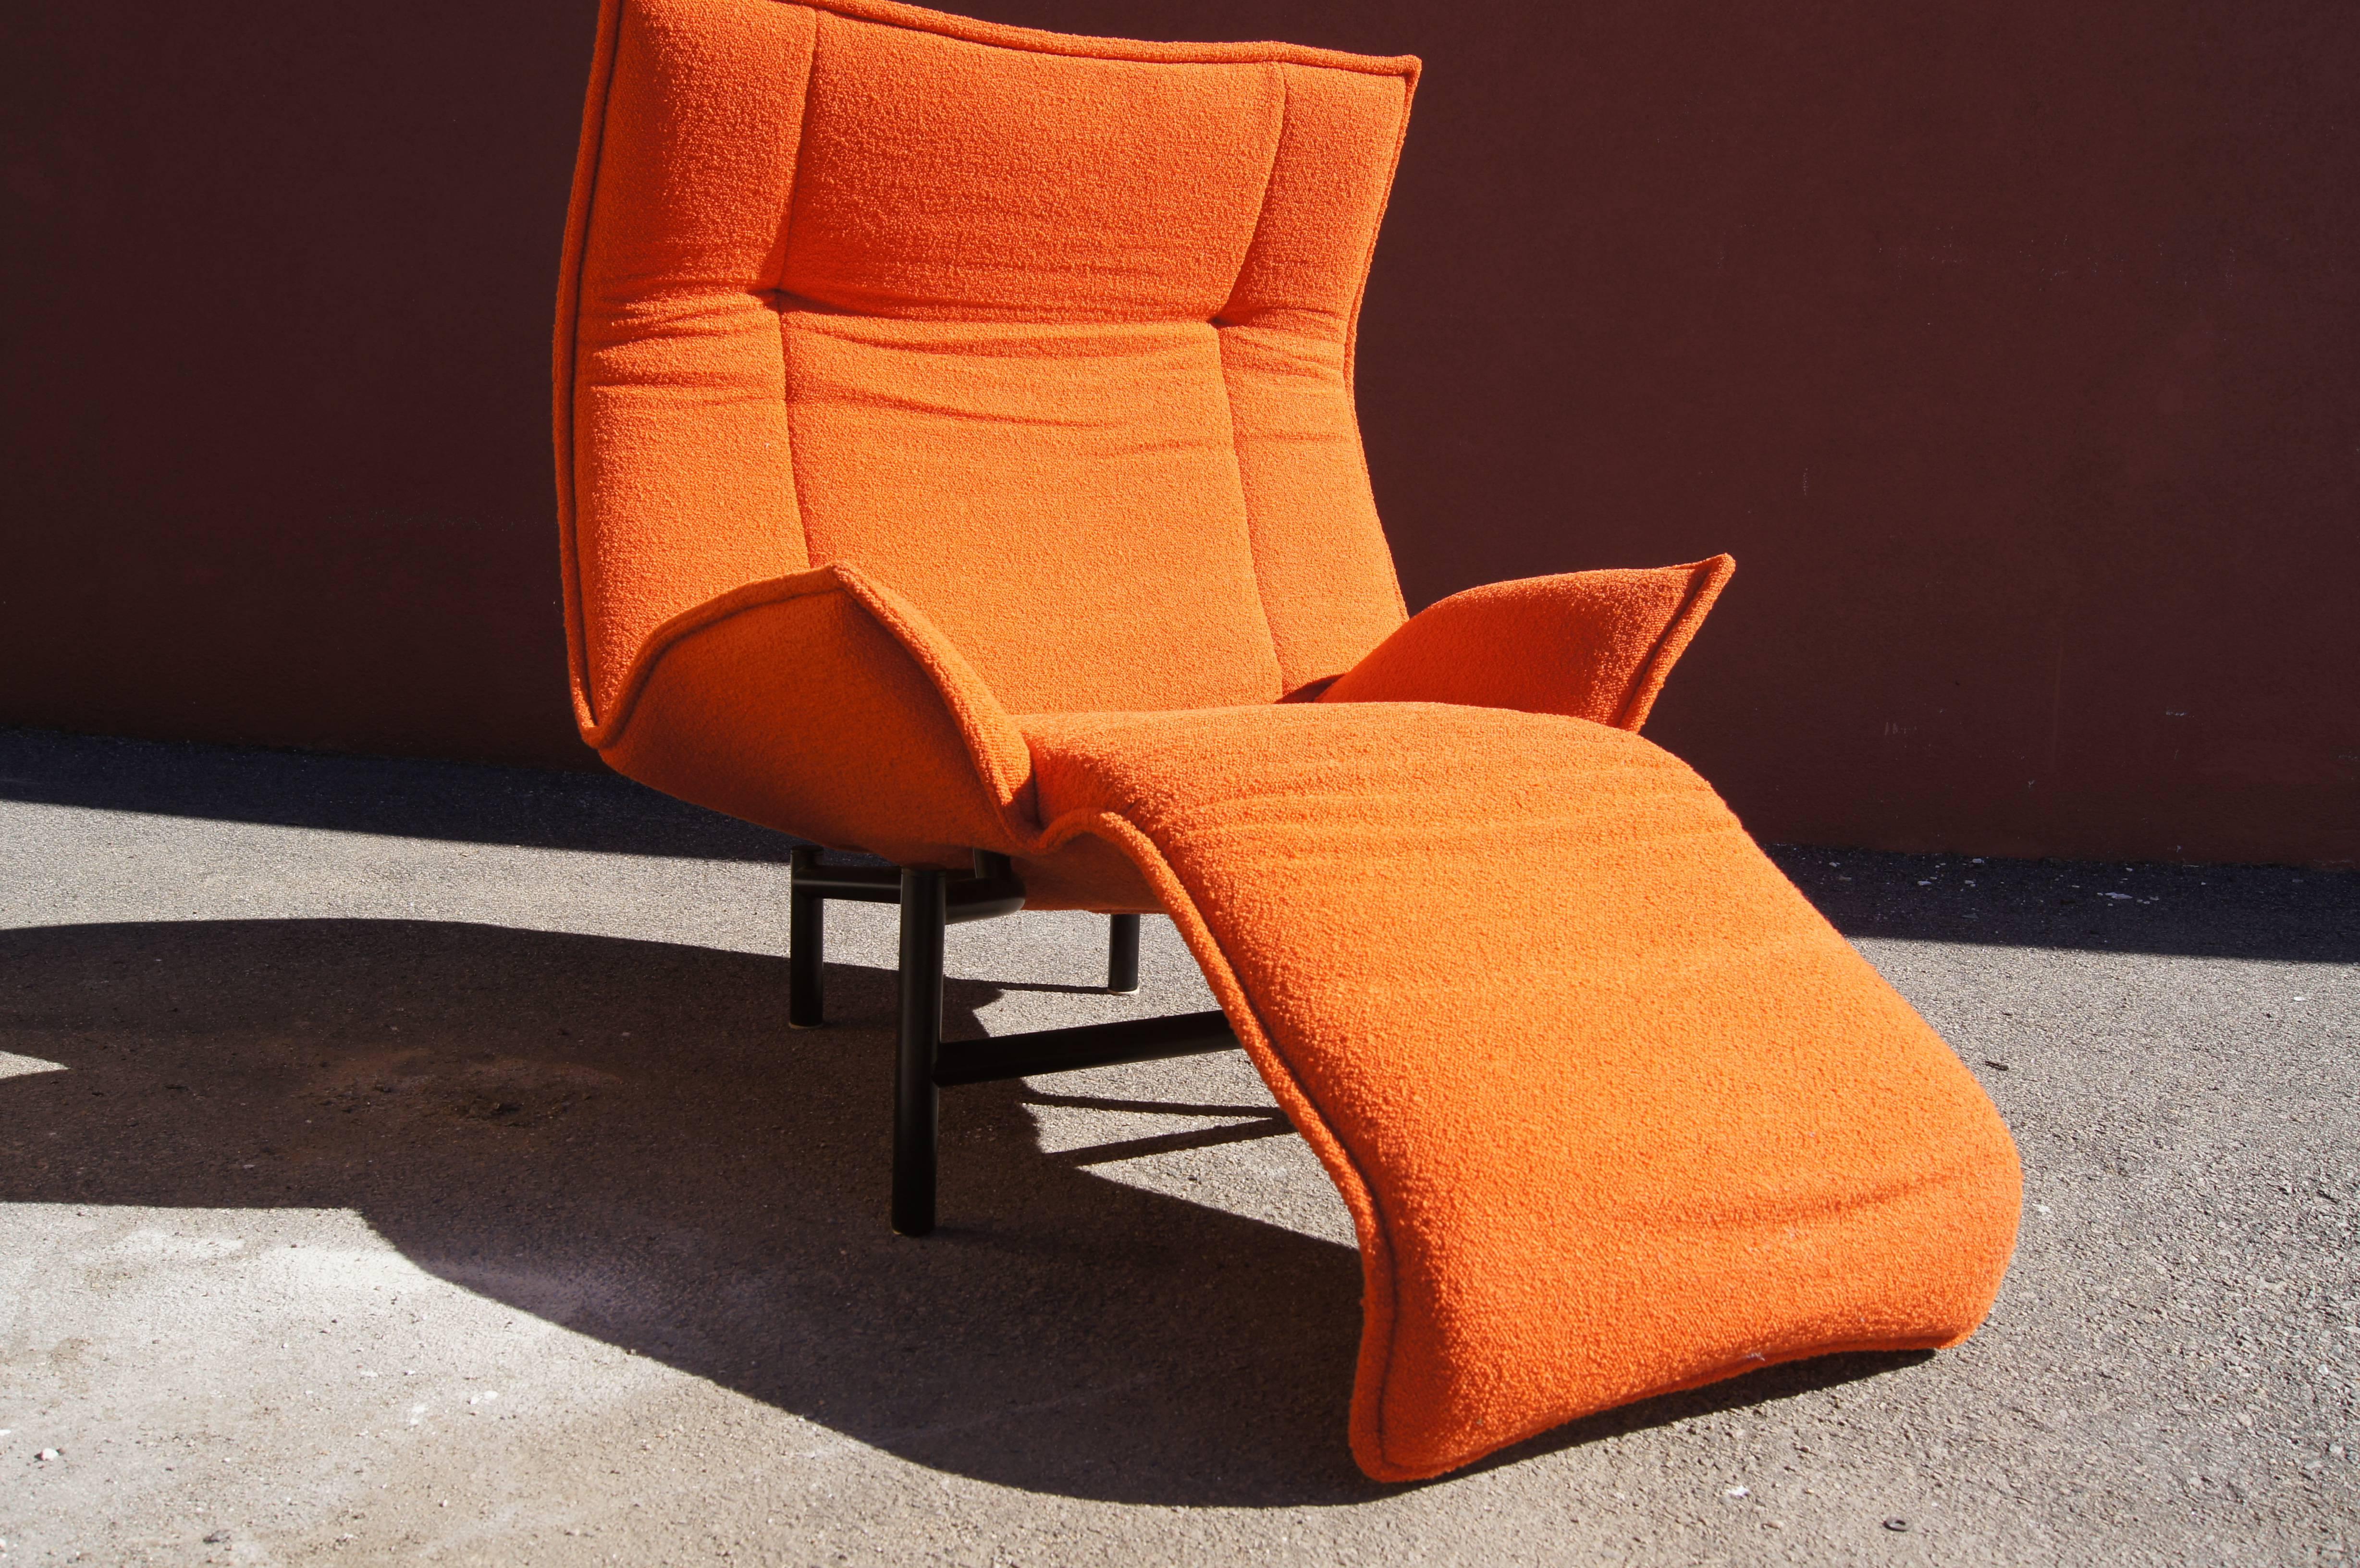 First conceived by Vico Magistretti in 1983 for Cassina, the exuberant Veranda lounge chair offers comfort and flexibility. The inner steel frame adjusts to reconfigure the chair. The seat can tilt back and fold up or down to change the height of